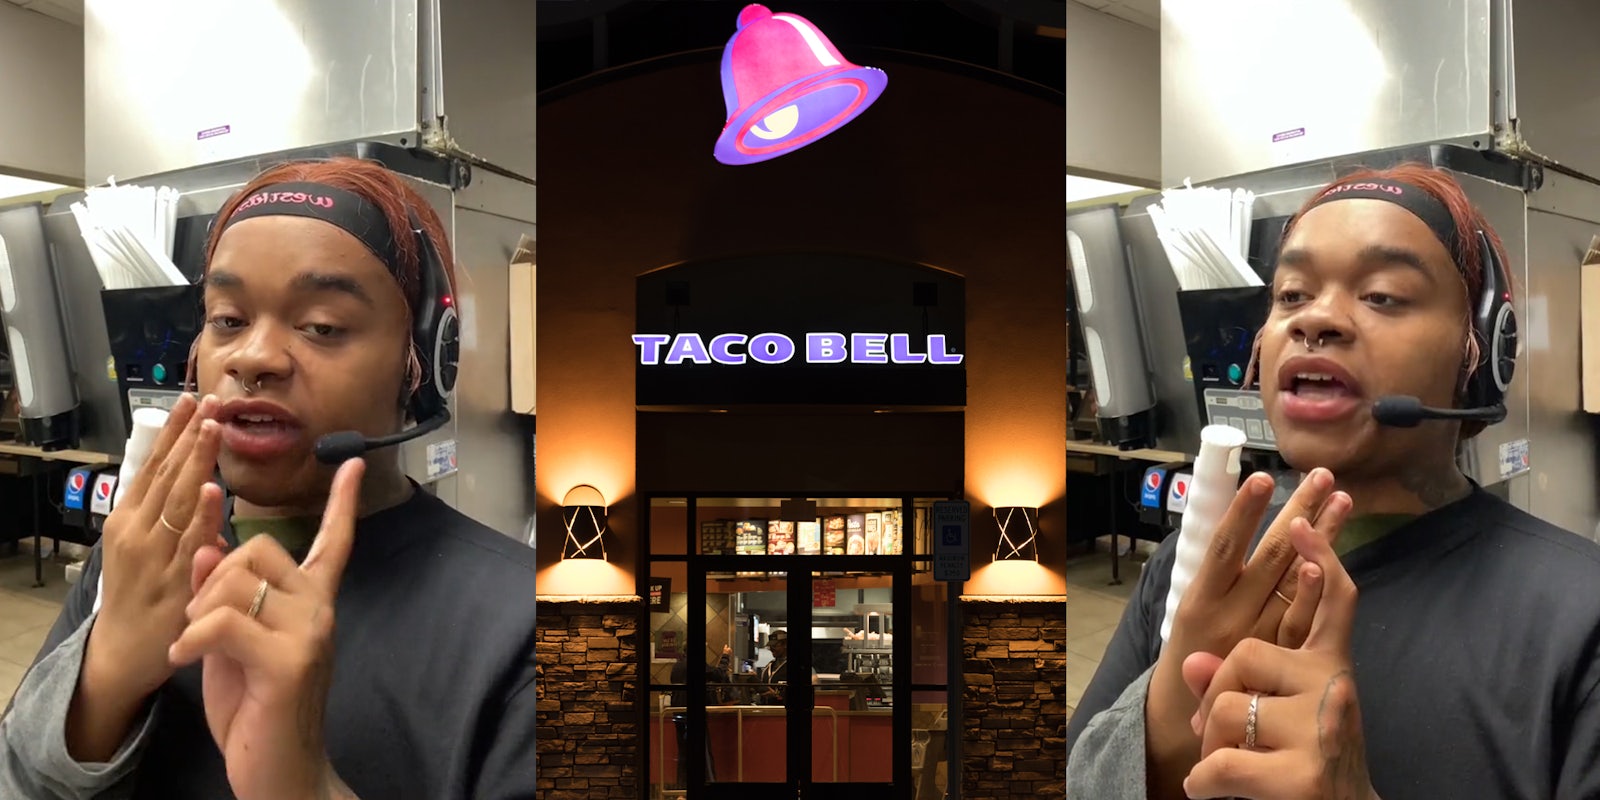 Taco Bell employee speaking with headset on while counting items on fingers (l) Taco Bell entrance at night with sign (c) Taco Bell employee speaking with headset on while counting items on fingers (r)